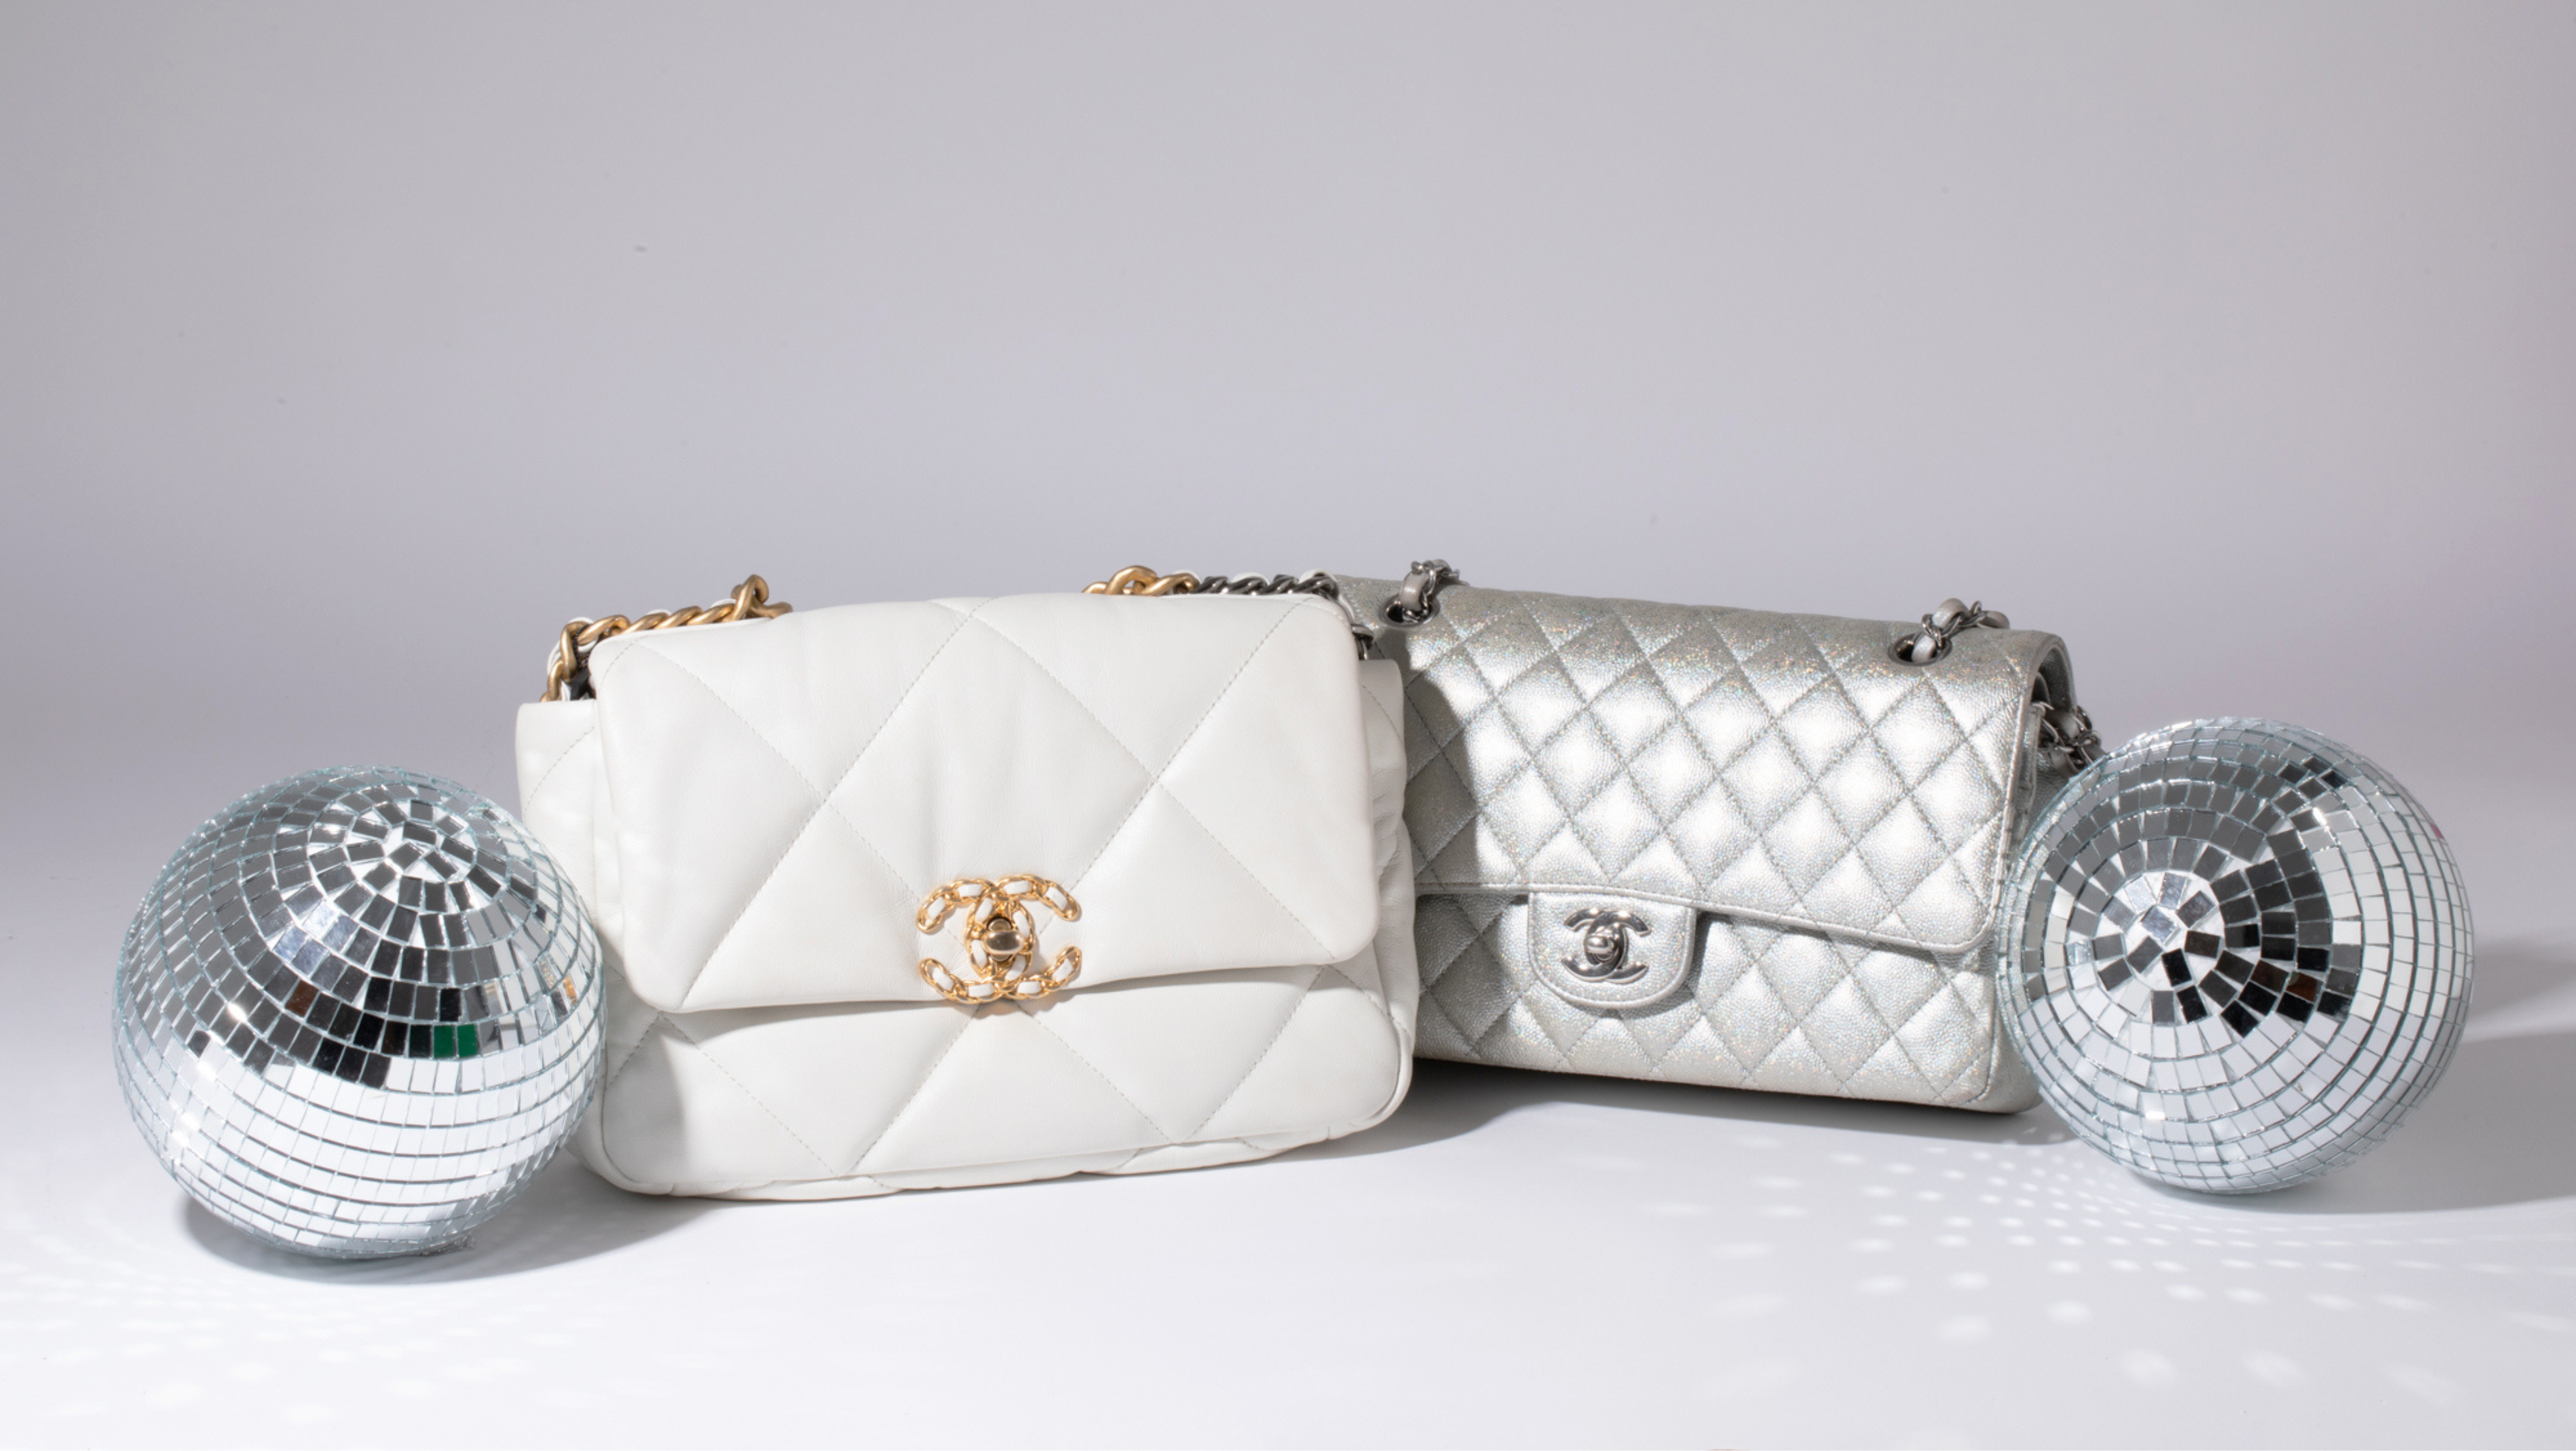 WATCH THIS BEFORE BUYING YOUR FIRST CHANEL BAG - TOP 10 CHANEL BAGS TO BUY  *RANKED*